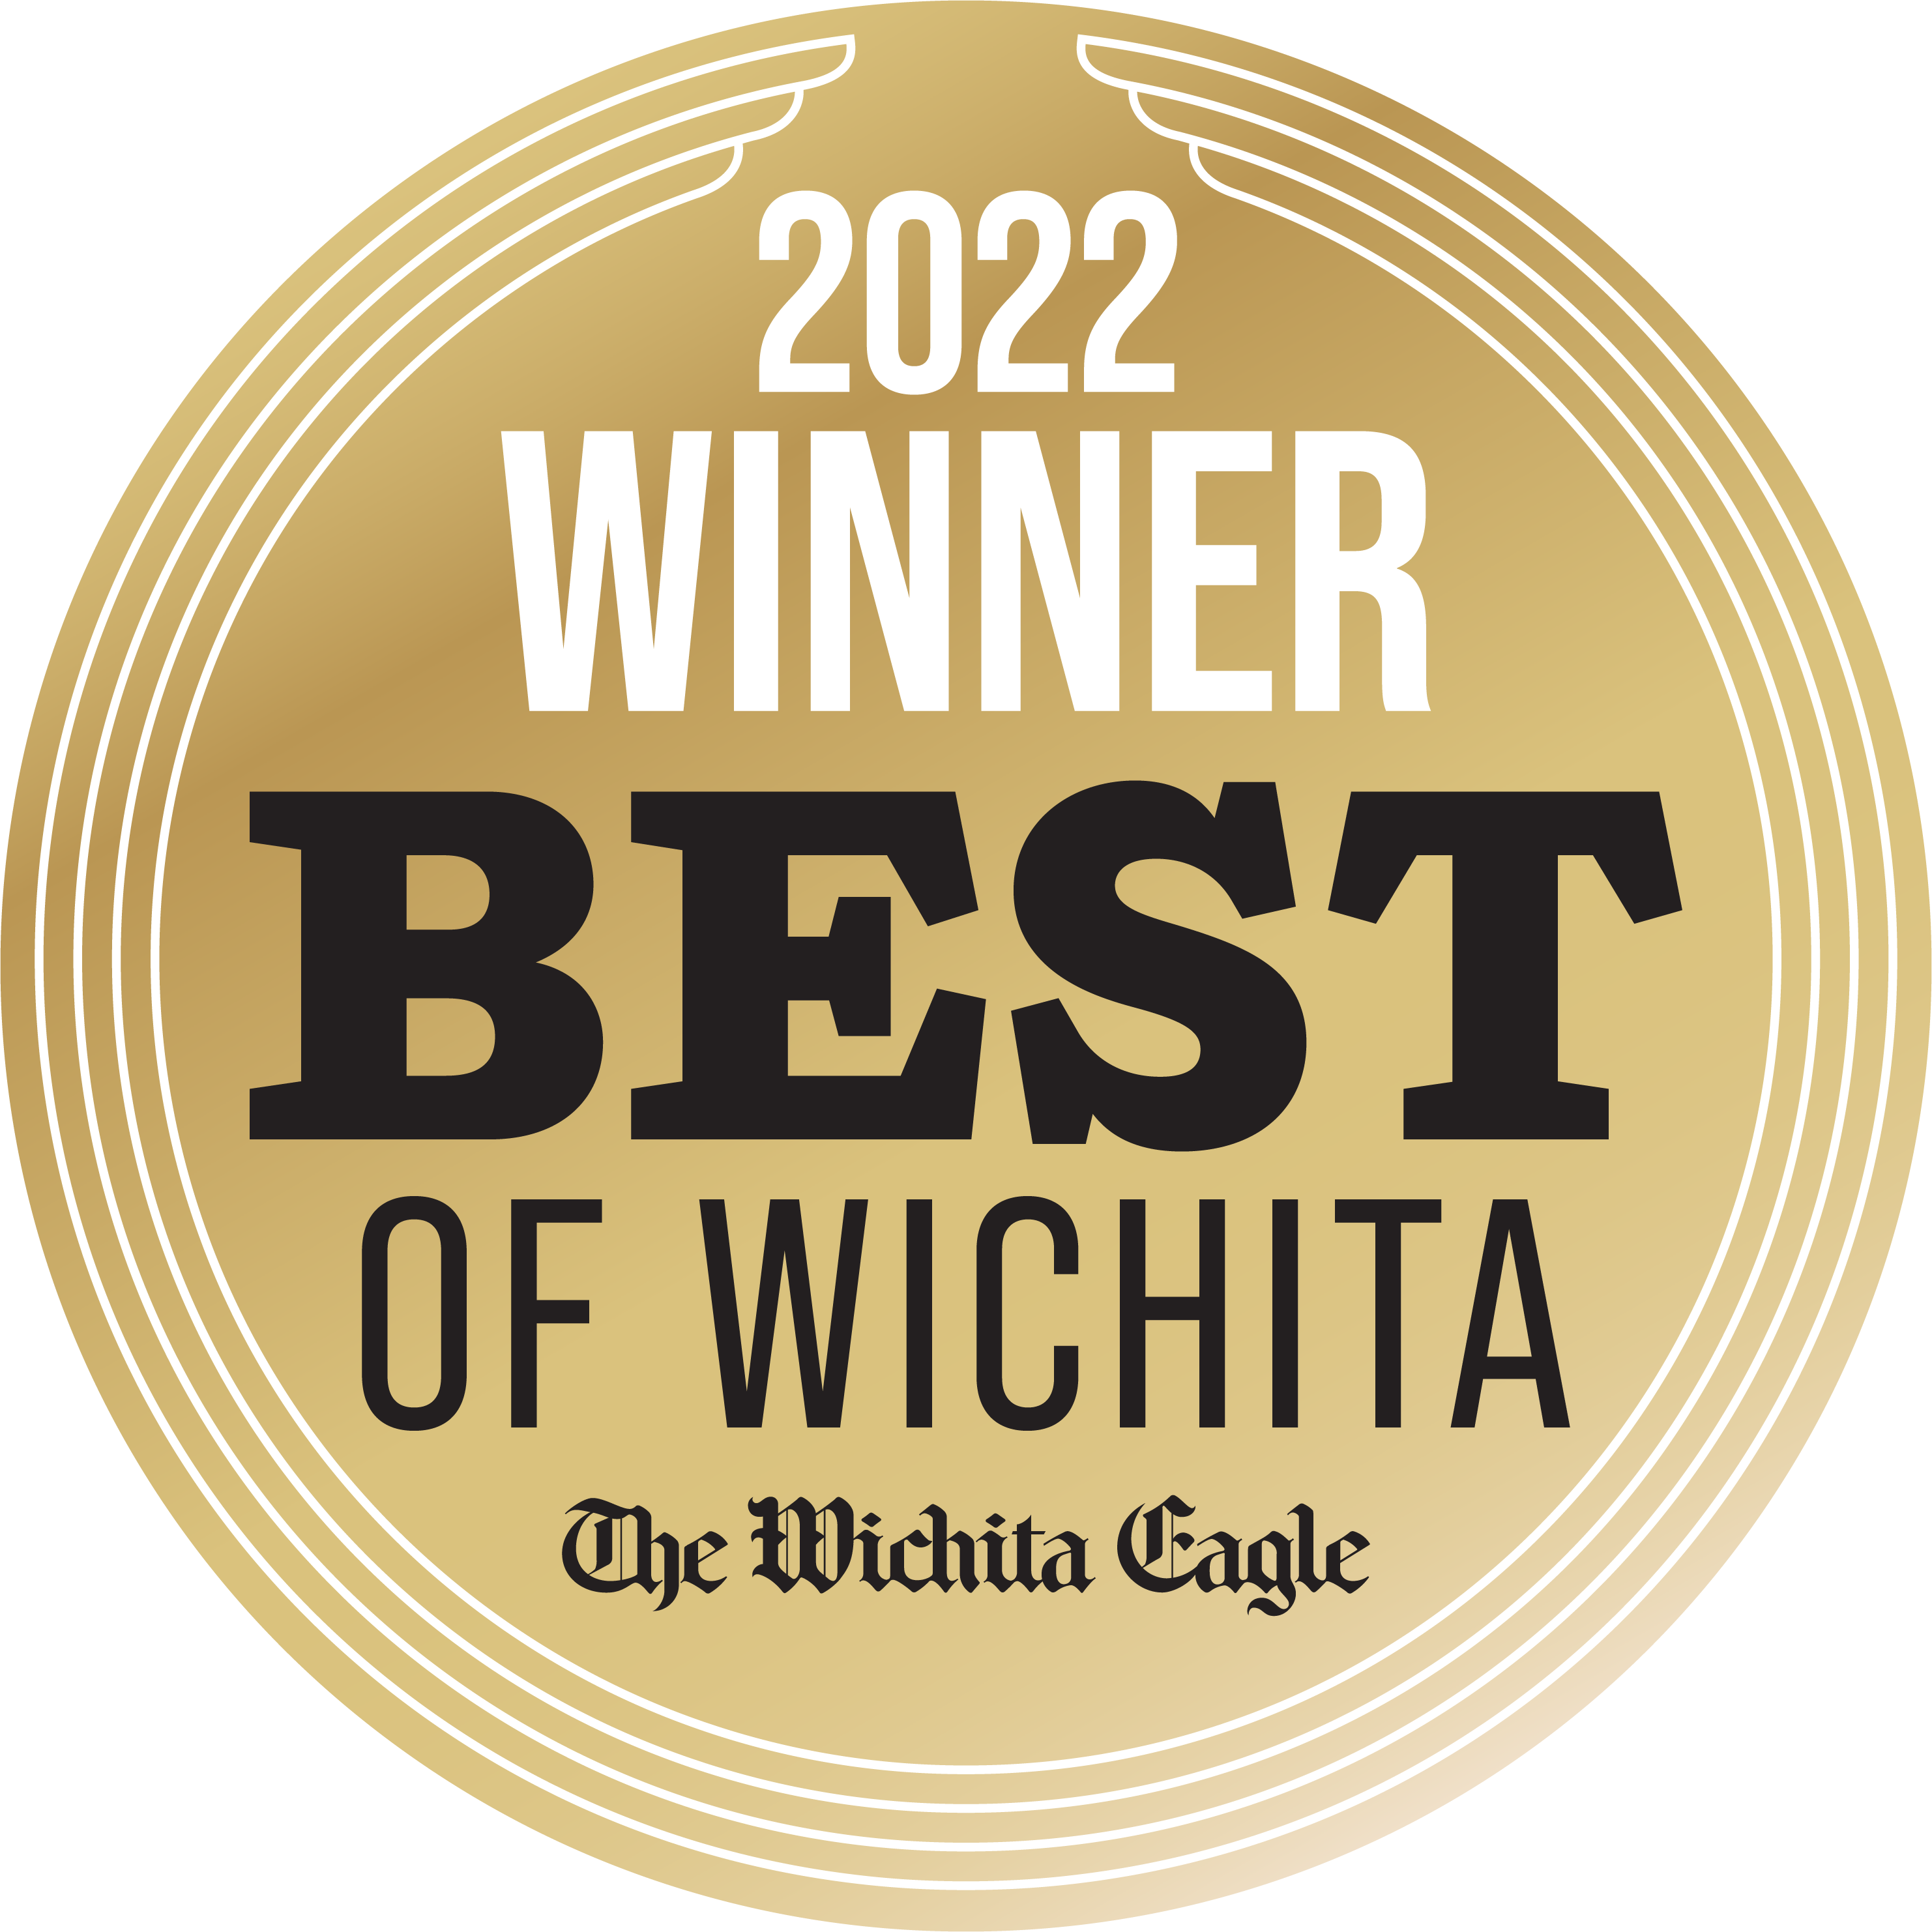 Gold circle with text on top 2022 winner best of Wichita